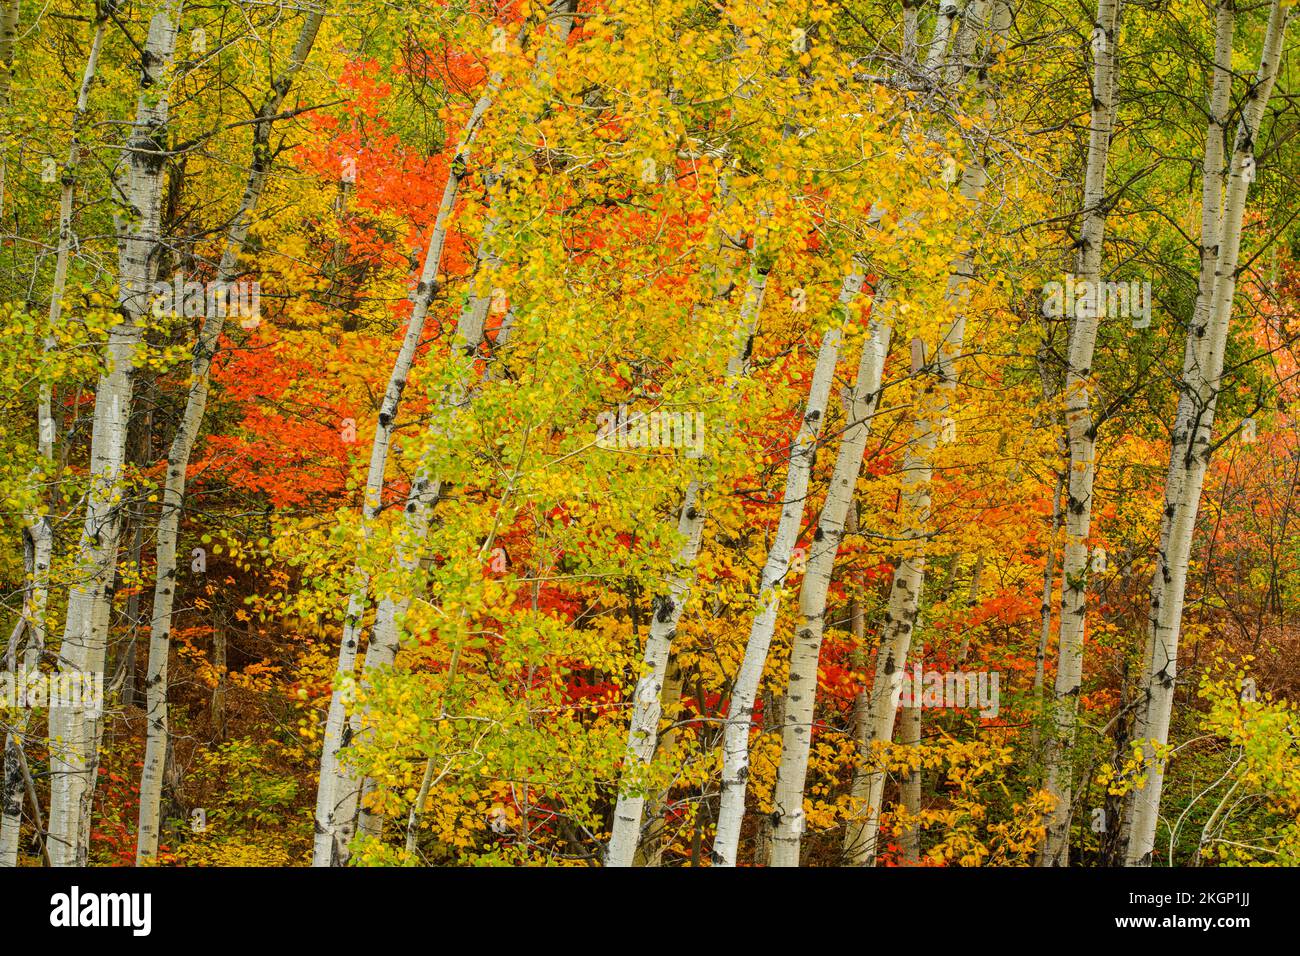 Autumn red maple foliage in a stand of poplar trees, Greater Sudbury, Ontario, Canada Stock Photo